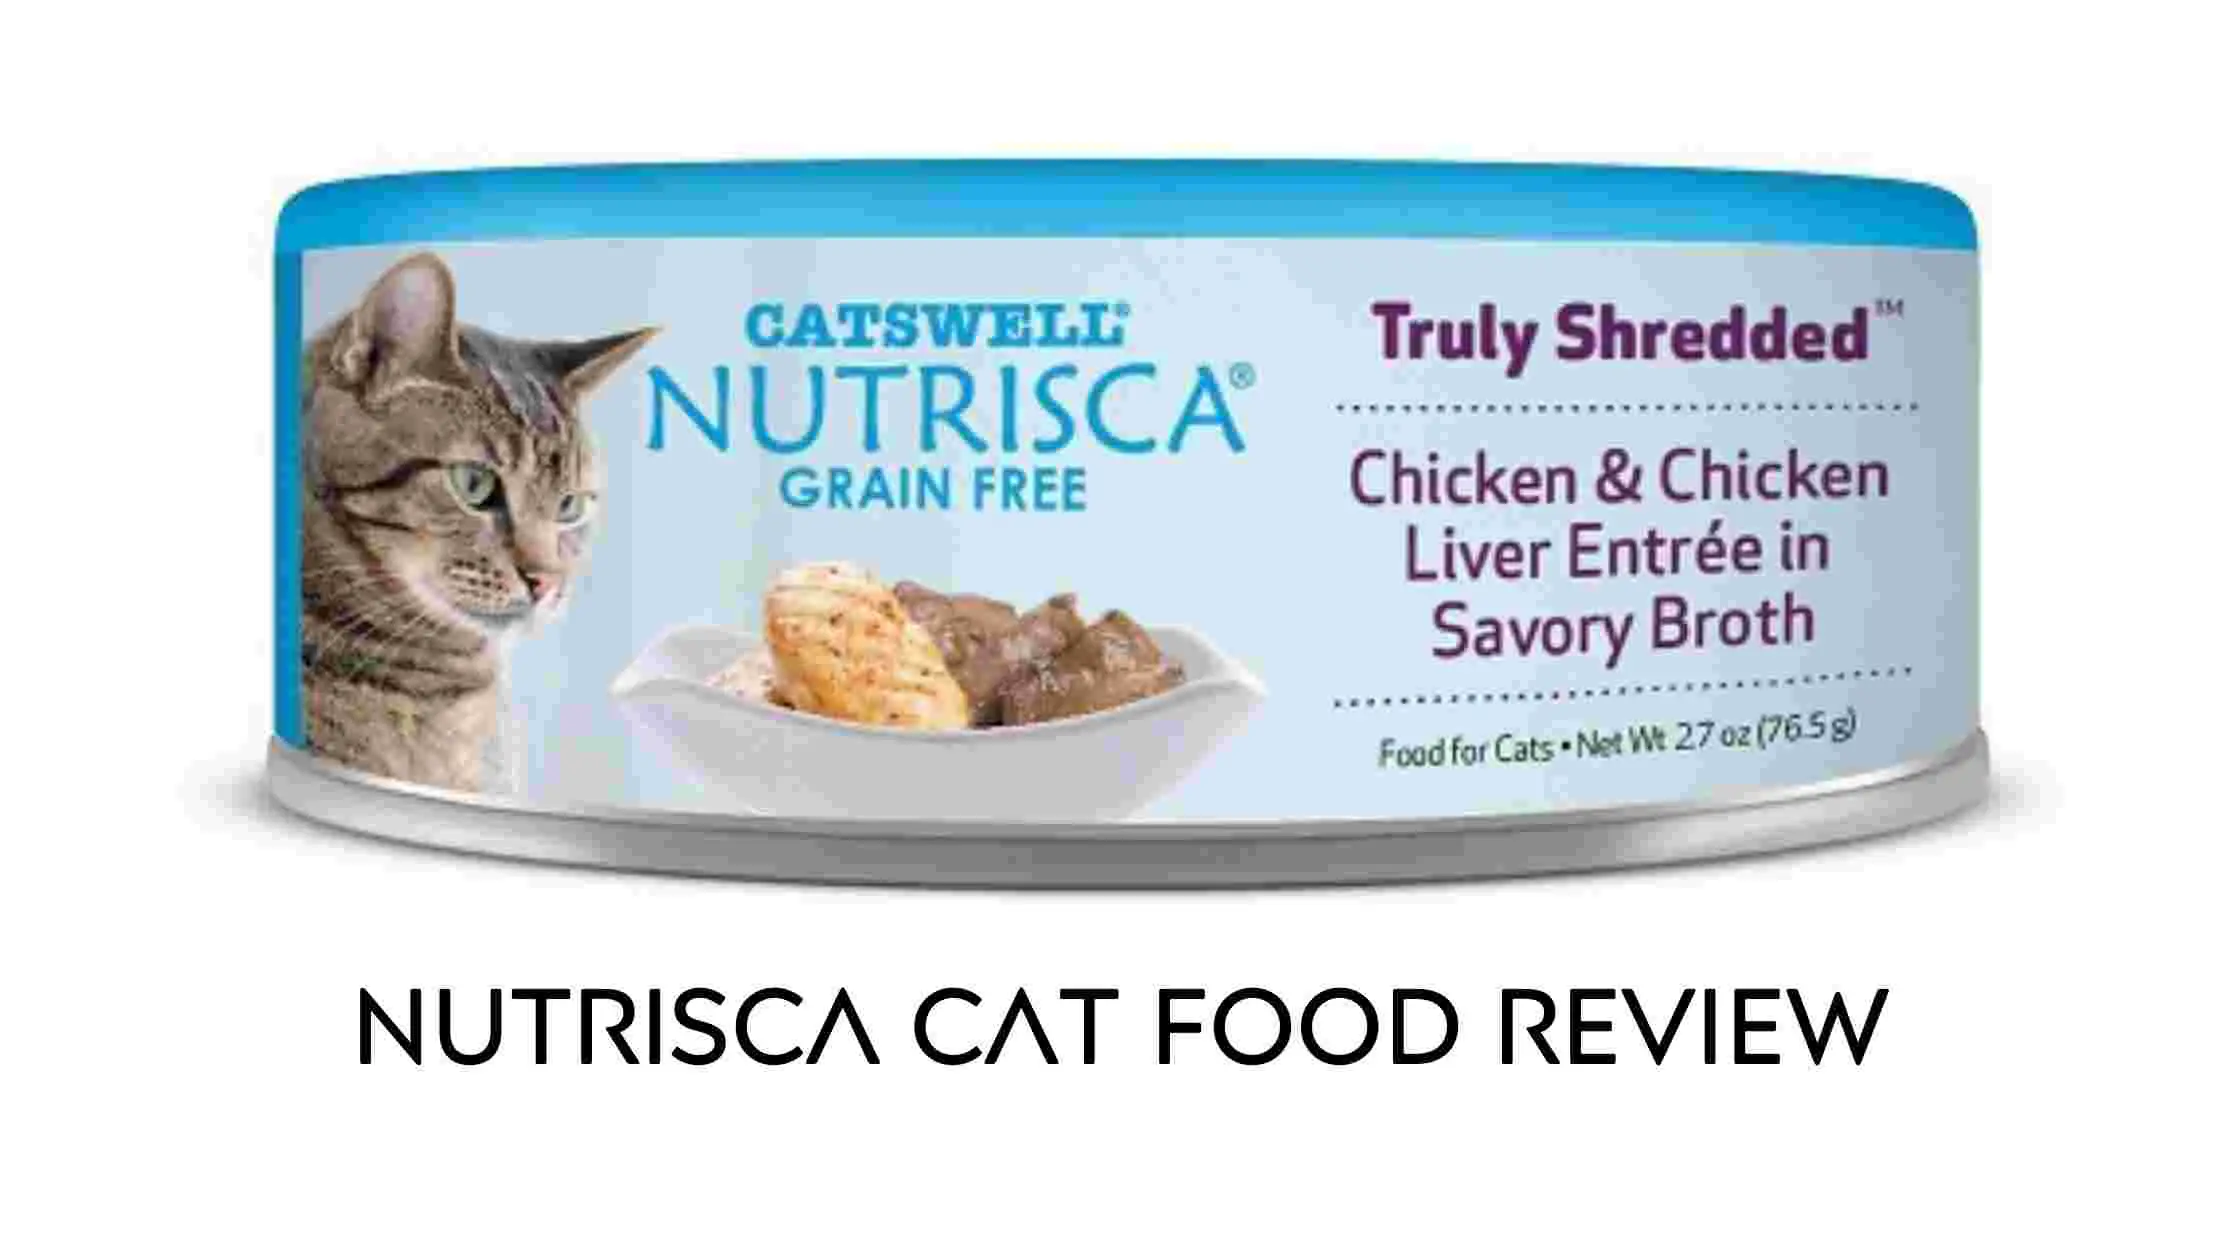 NUTRISCA Cat Food Review